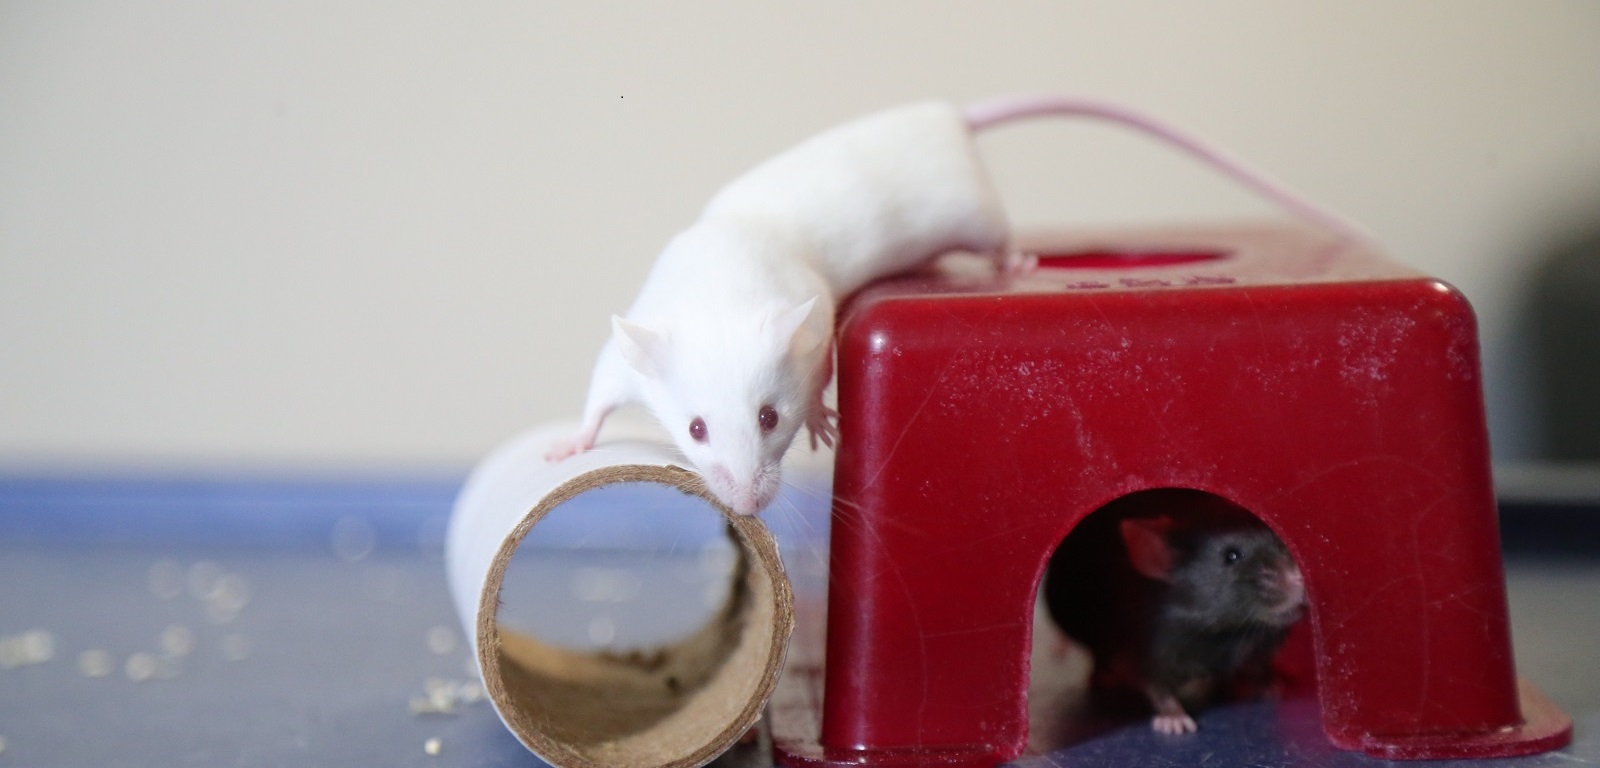 A white mouse climbing on small apparatus